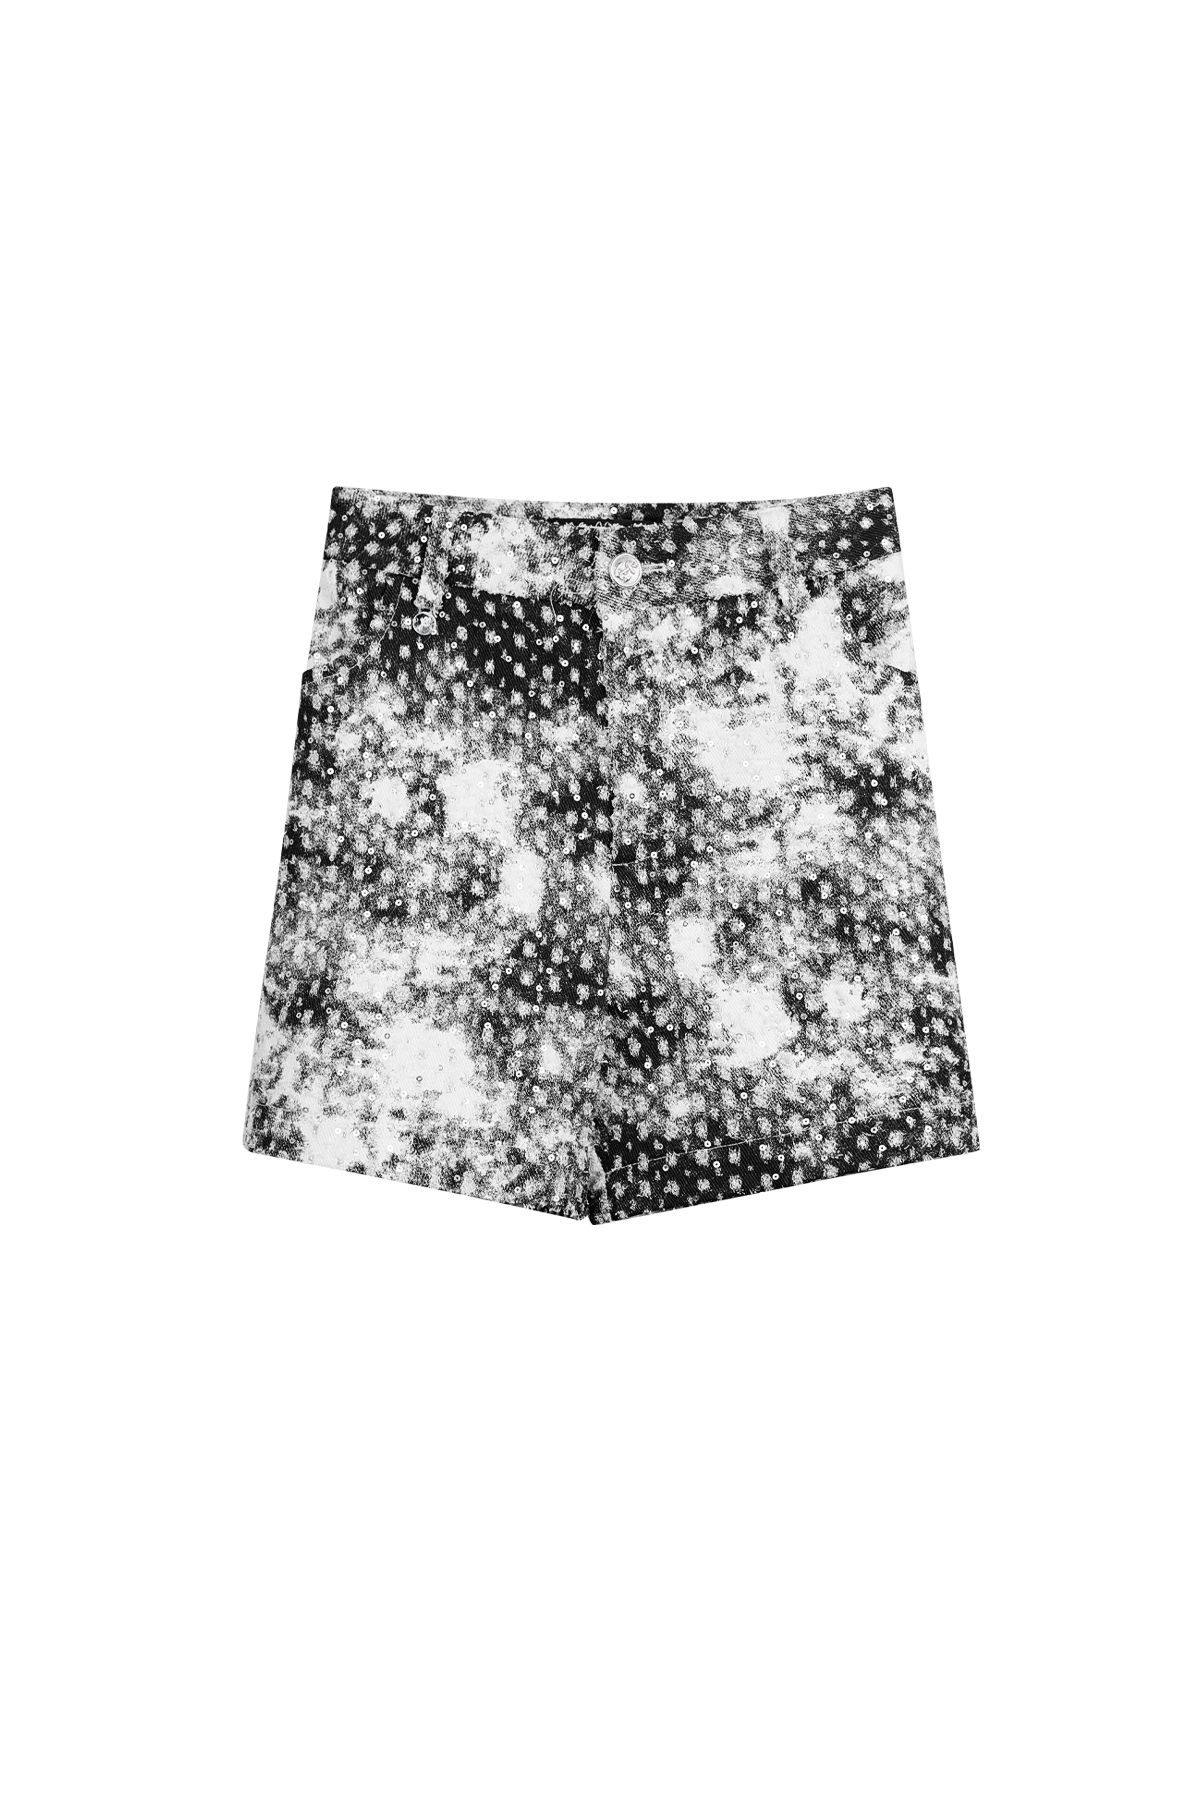 Short spots with glitter - black and white - S h5 